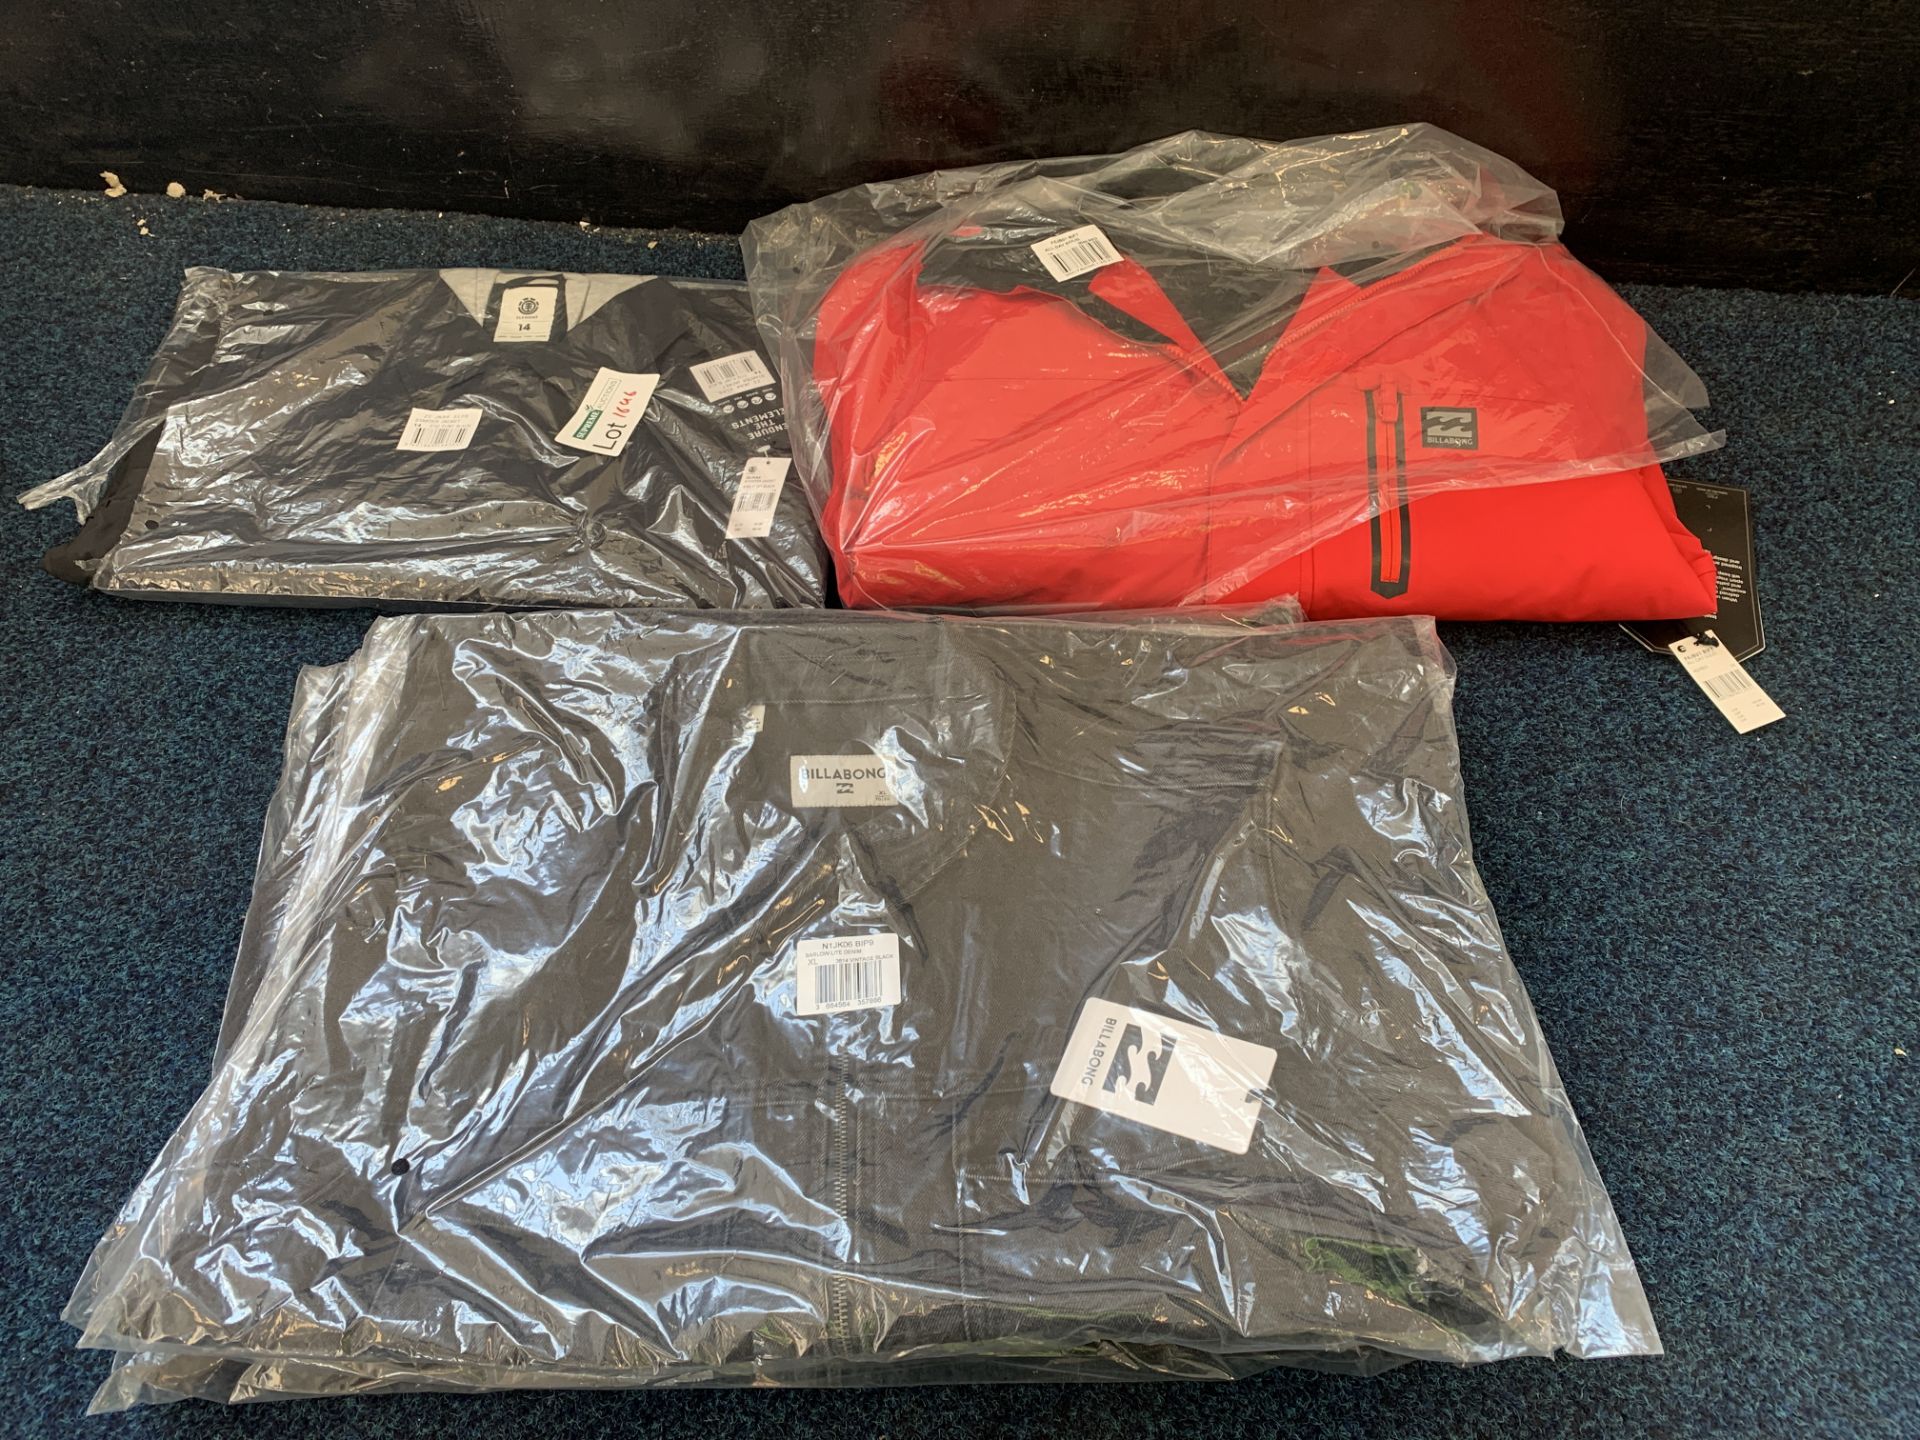 5 X BRAND NEW BILLABONG/ELEMENT JACKETS IN VARIOUS STYLES AND SIZES